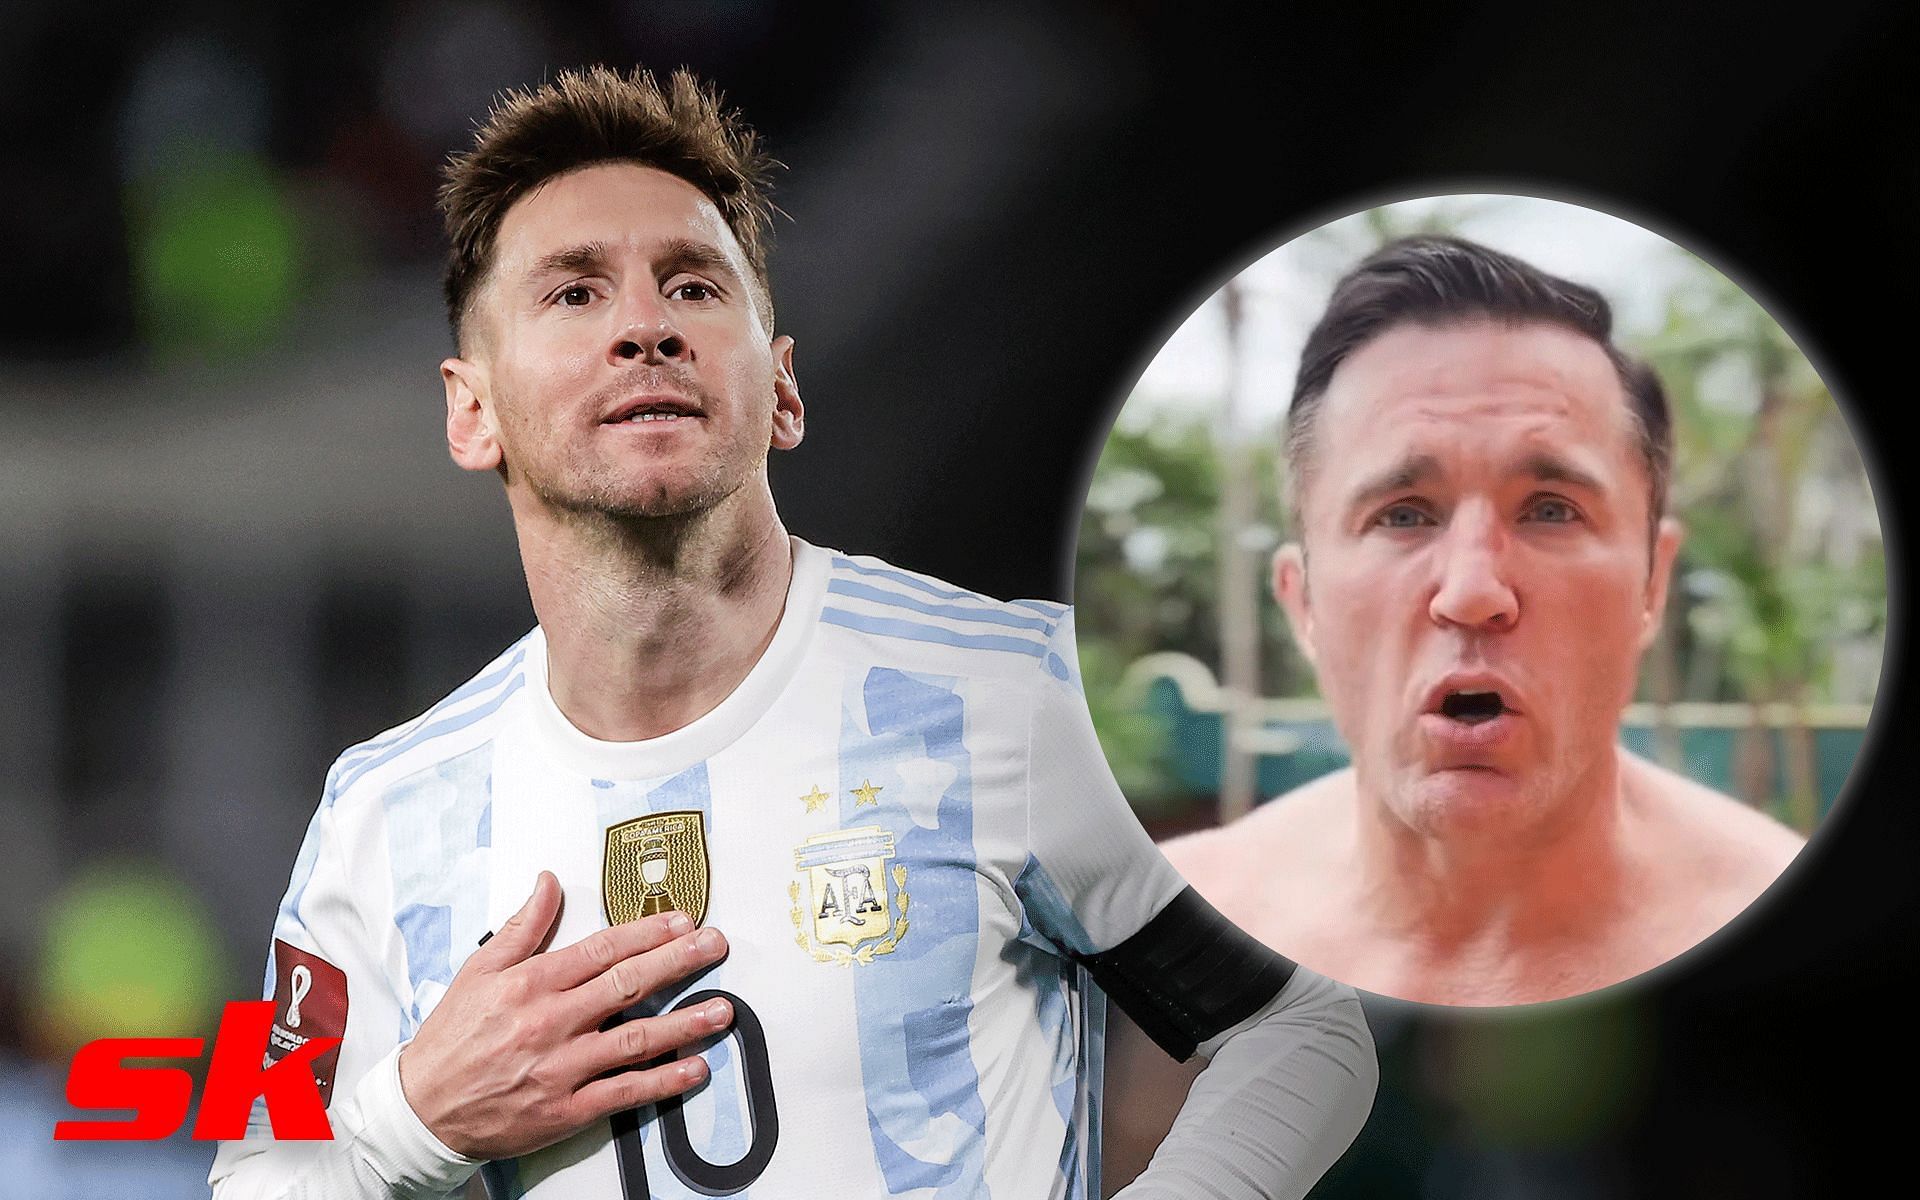 Lionel Messi and Chael Sonnen [Image credits: Getty Images and @leomessi on Instagram]